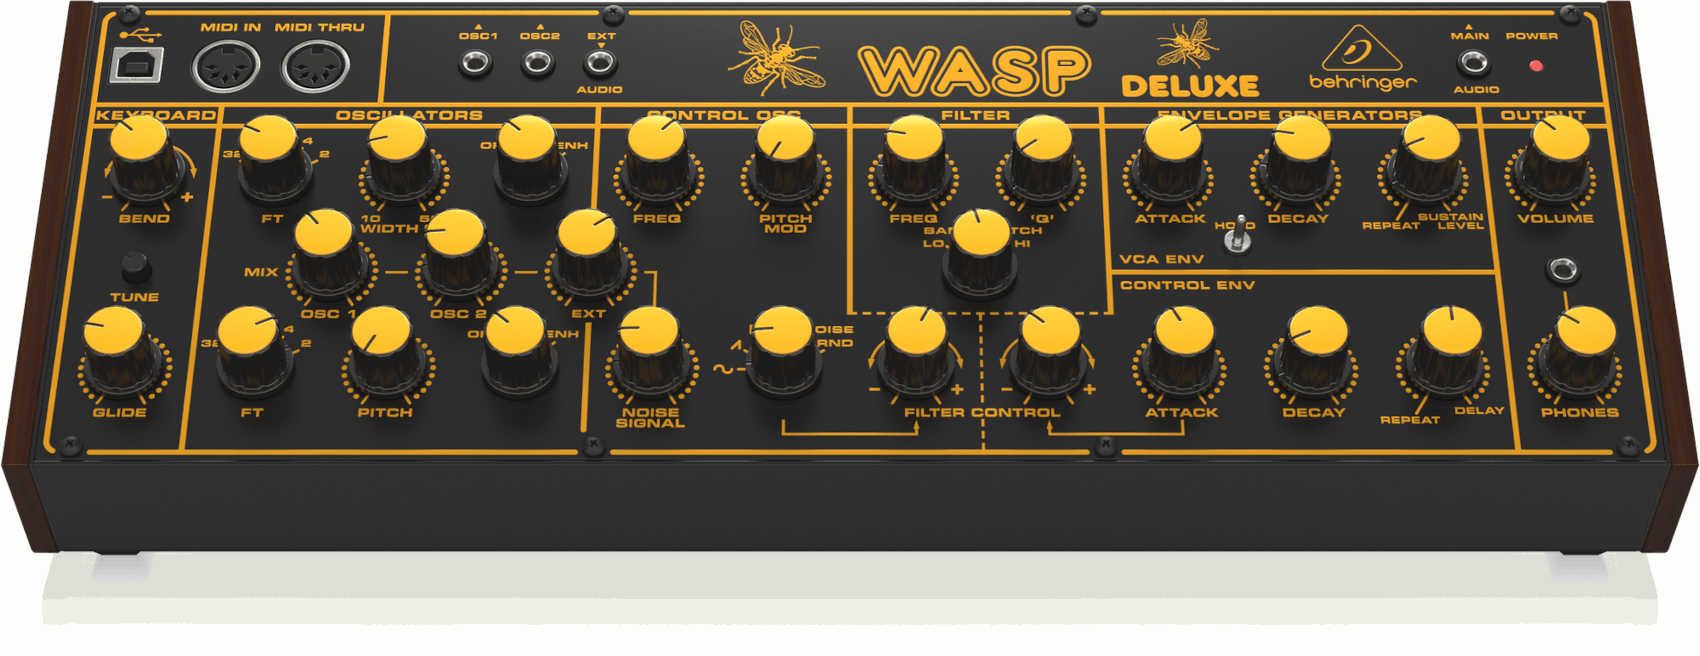 Behringer WASP DELUXE - фото 2